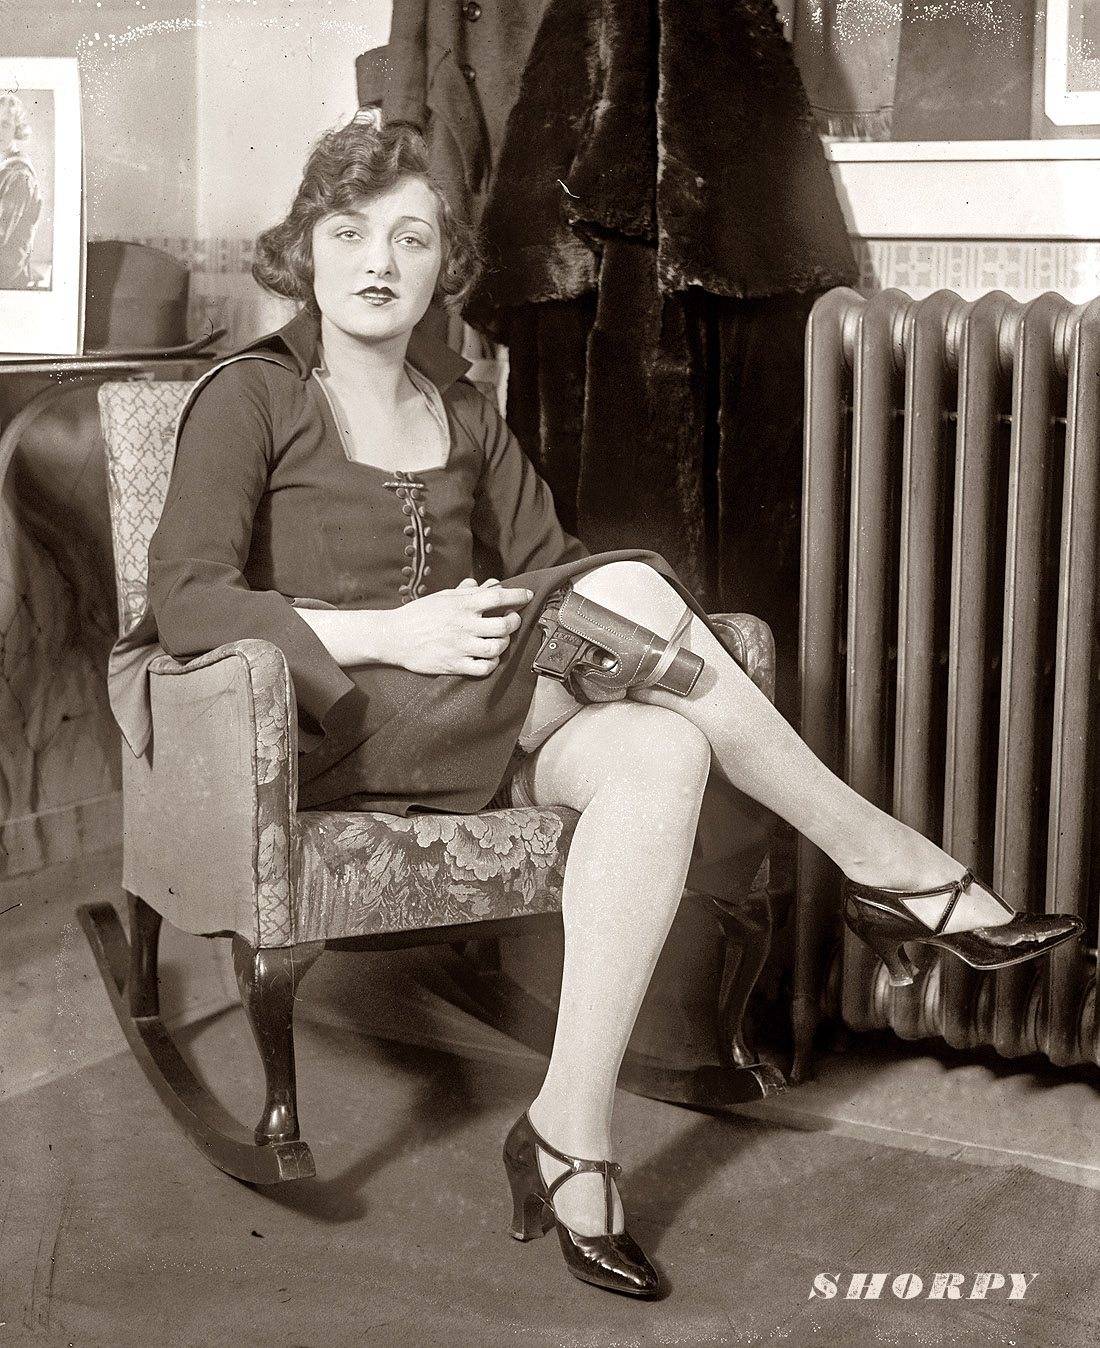 " 'Safety first' is the motto of Miss Mary Jayne of Keith's circuit. Mary Jayne, seated in rocking chair with pistol strapped to her knee, claiming exemption from concealed weapon regulation by saying her thirty-two isn't a concealed weapon in these days of knee-length skirts." National Photo Company Collection, February 14, 1922. View full size. The Keith Circuit was a chain of vaudeville theaters that eventually transitioned to motion pictures.